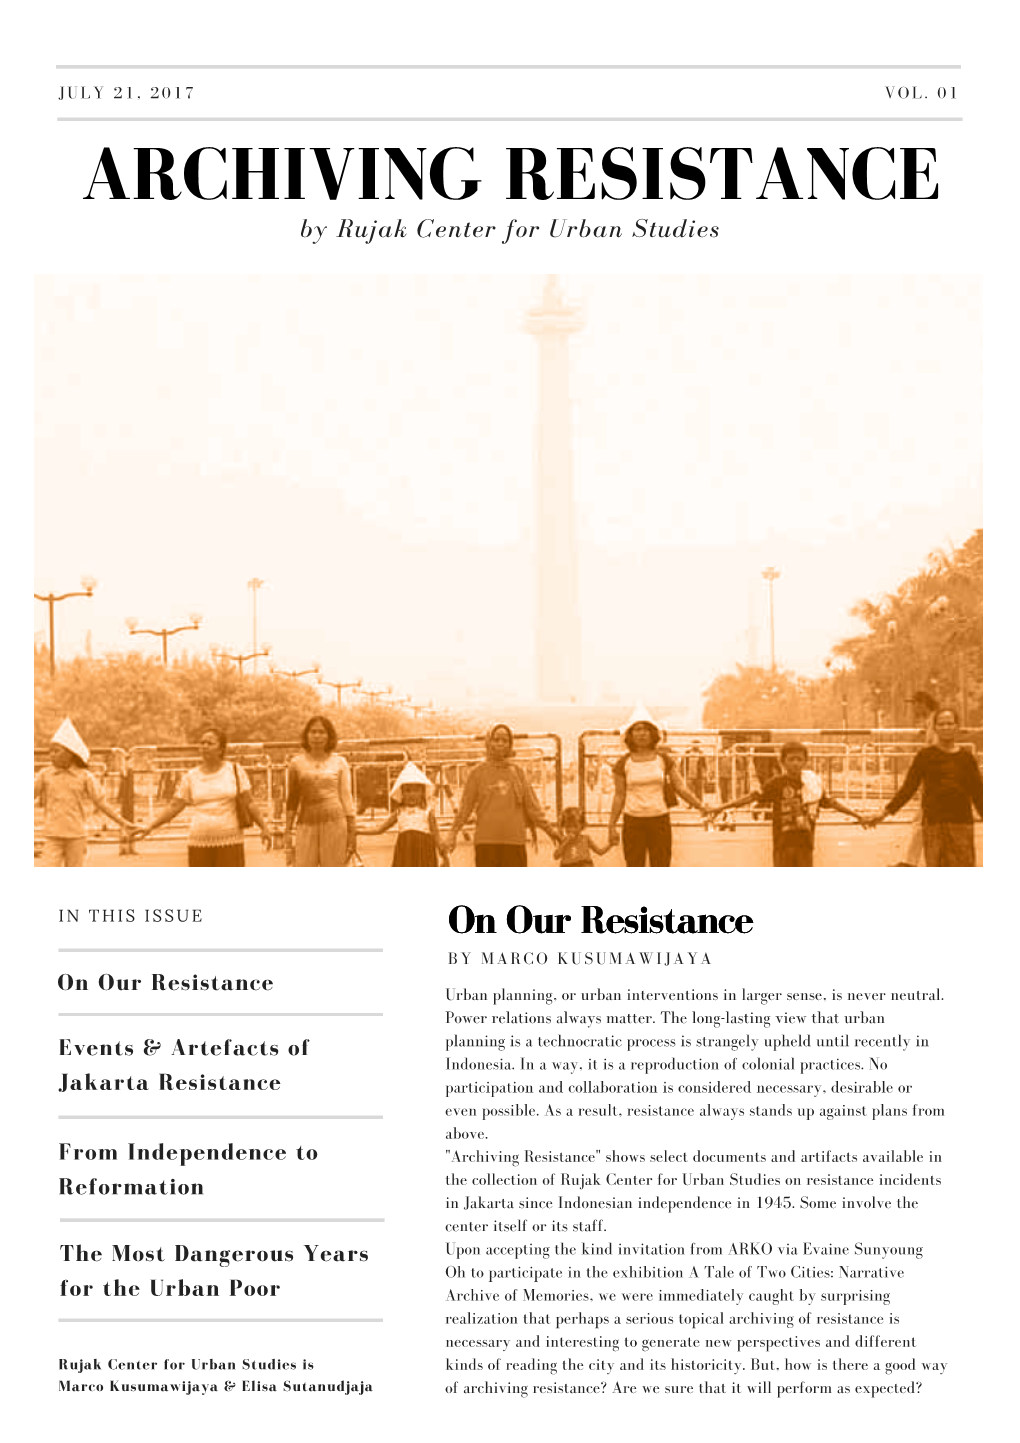 ARCHIVING RESISTANCE by Rujak Center for Urban Studies